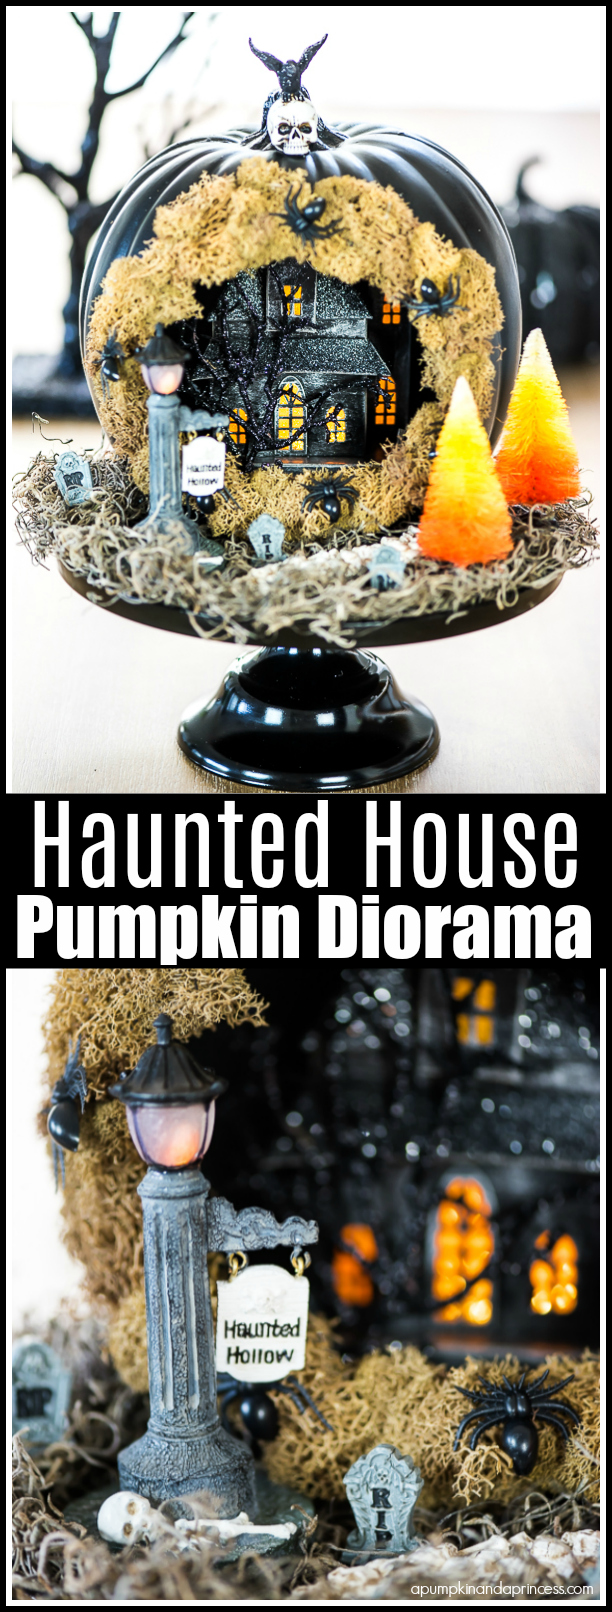 Create a Haunted House Pumpkin Diorama with tiny spooky decorations, complete with a skeleton walkway, candy corn trees and tombstones.